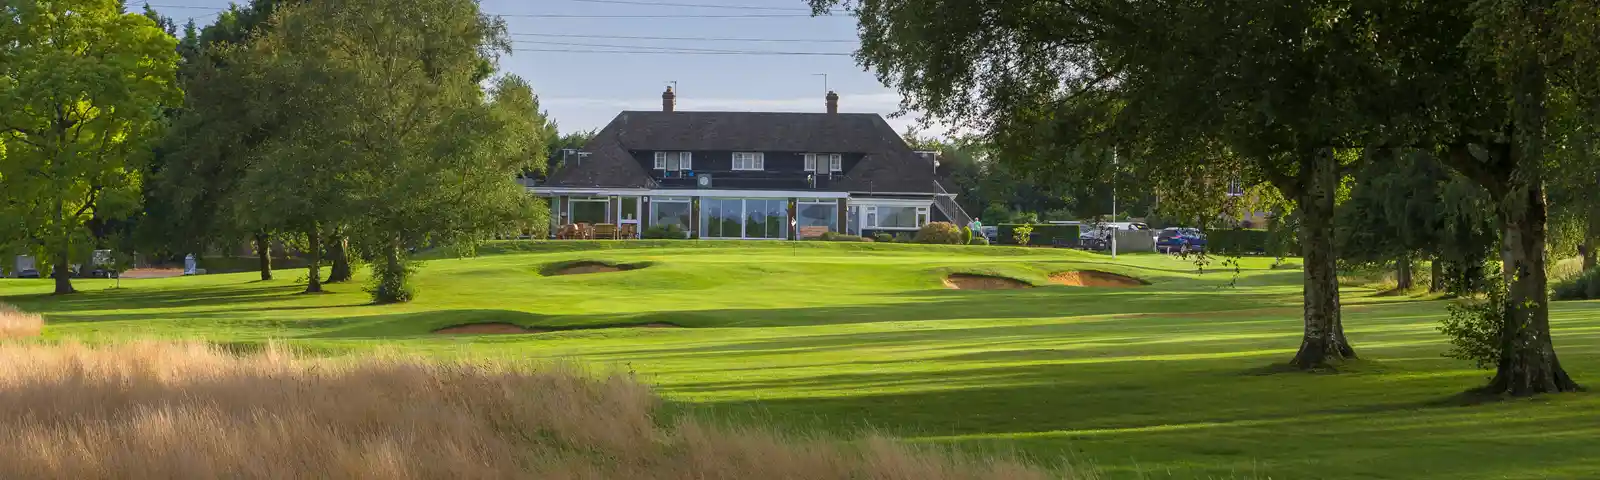 The Clubhouse At Canterbury Golf Club (Credit Andy Hiseman)